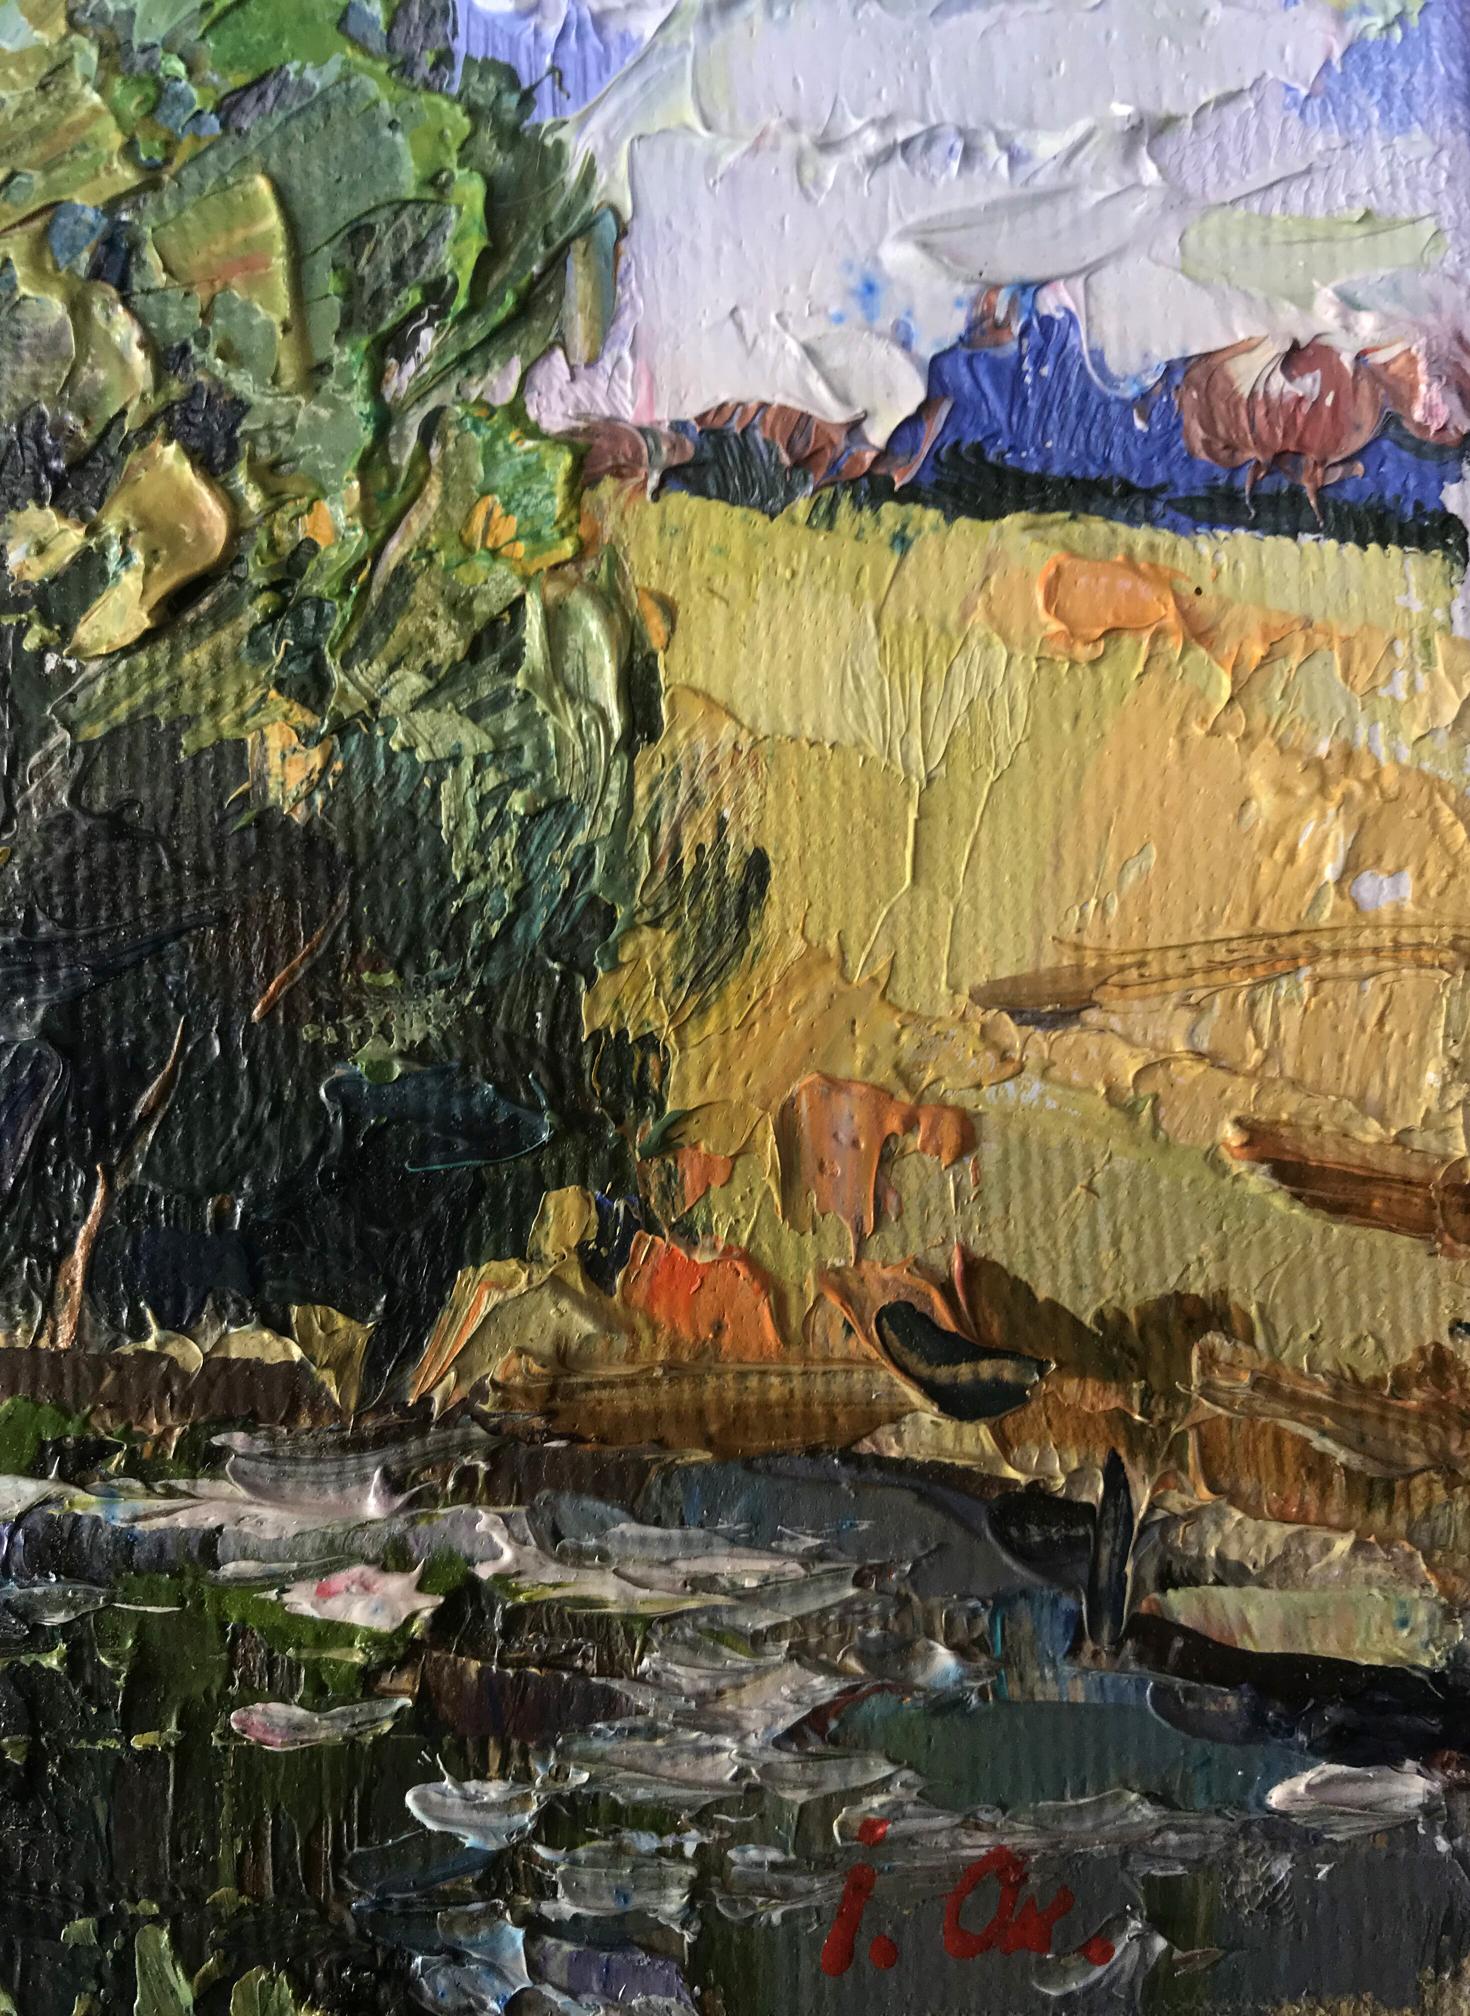 Oksana Ivanyuk's oil painting reveals a hidden lake deep within the forest